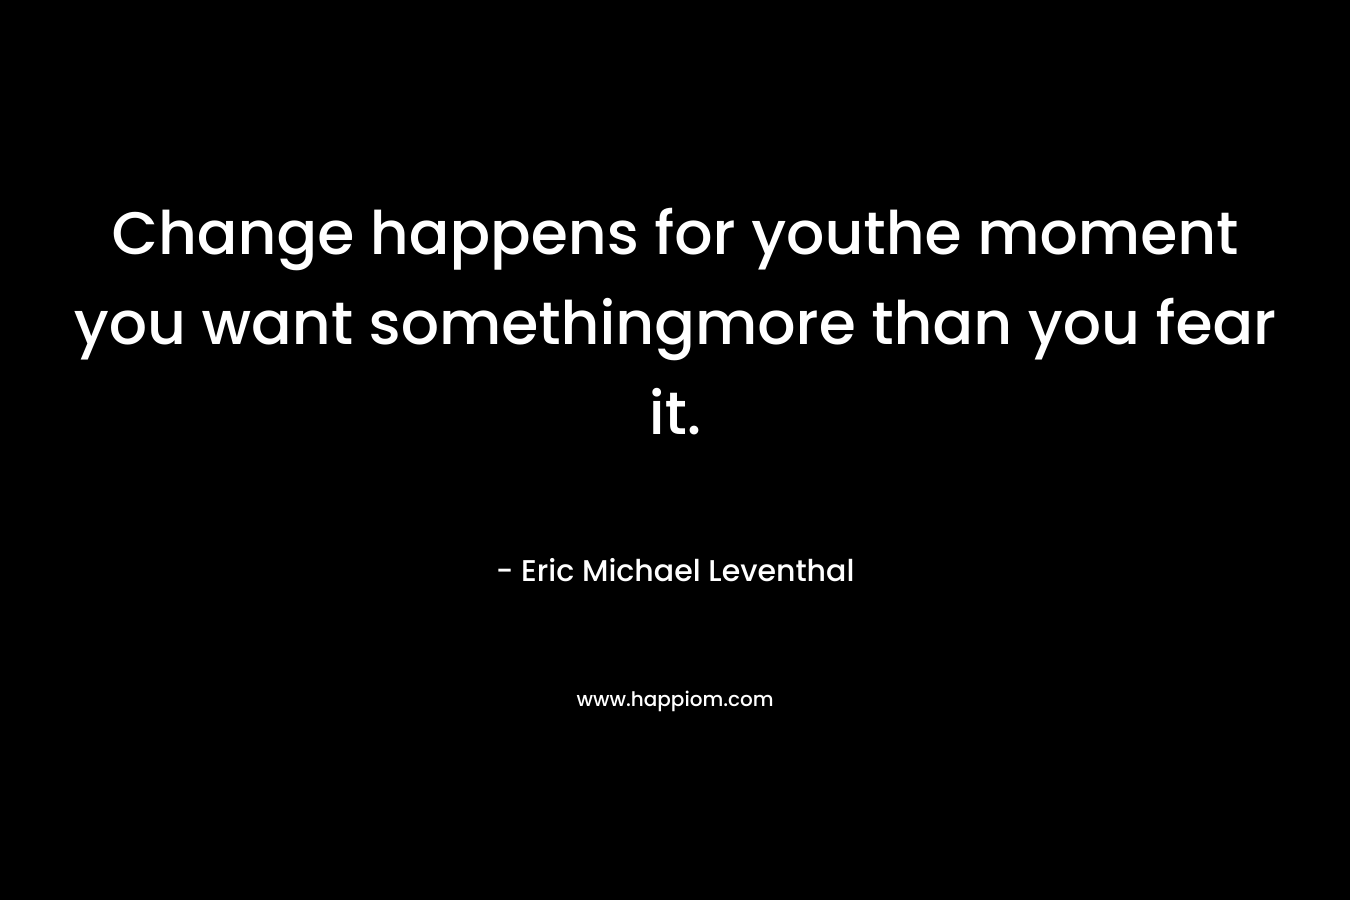 Change happens for youthe moment you want somethingmore than you fear it.